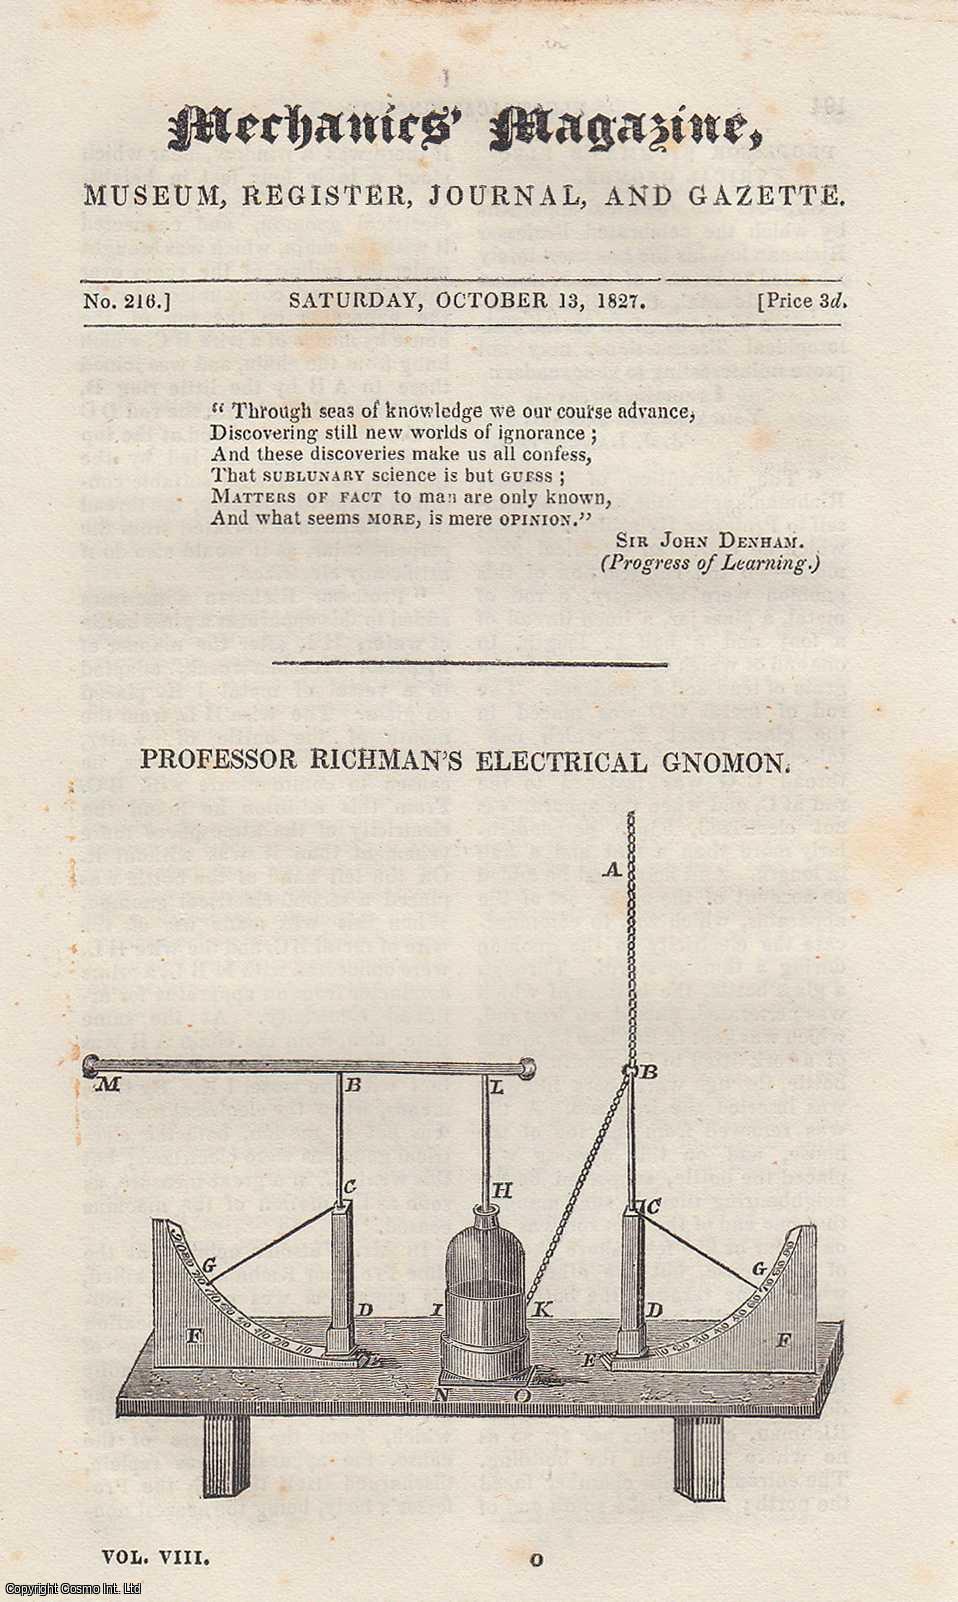 Mechanics Magazine - Professor Richman's Electrical Gnomon; Cotton Machinery: Hargraves & Arkwright; The Thames Tunnel, etc. Mechanics Magazine, Museum, Register, Journal and Gazette. Issue No. 216. A complete rare weekly issue of the Mechanics' Magazine, 1827.